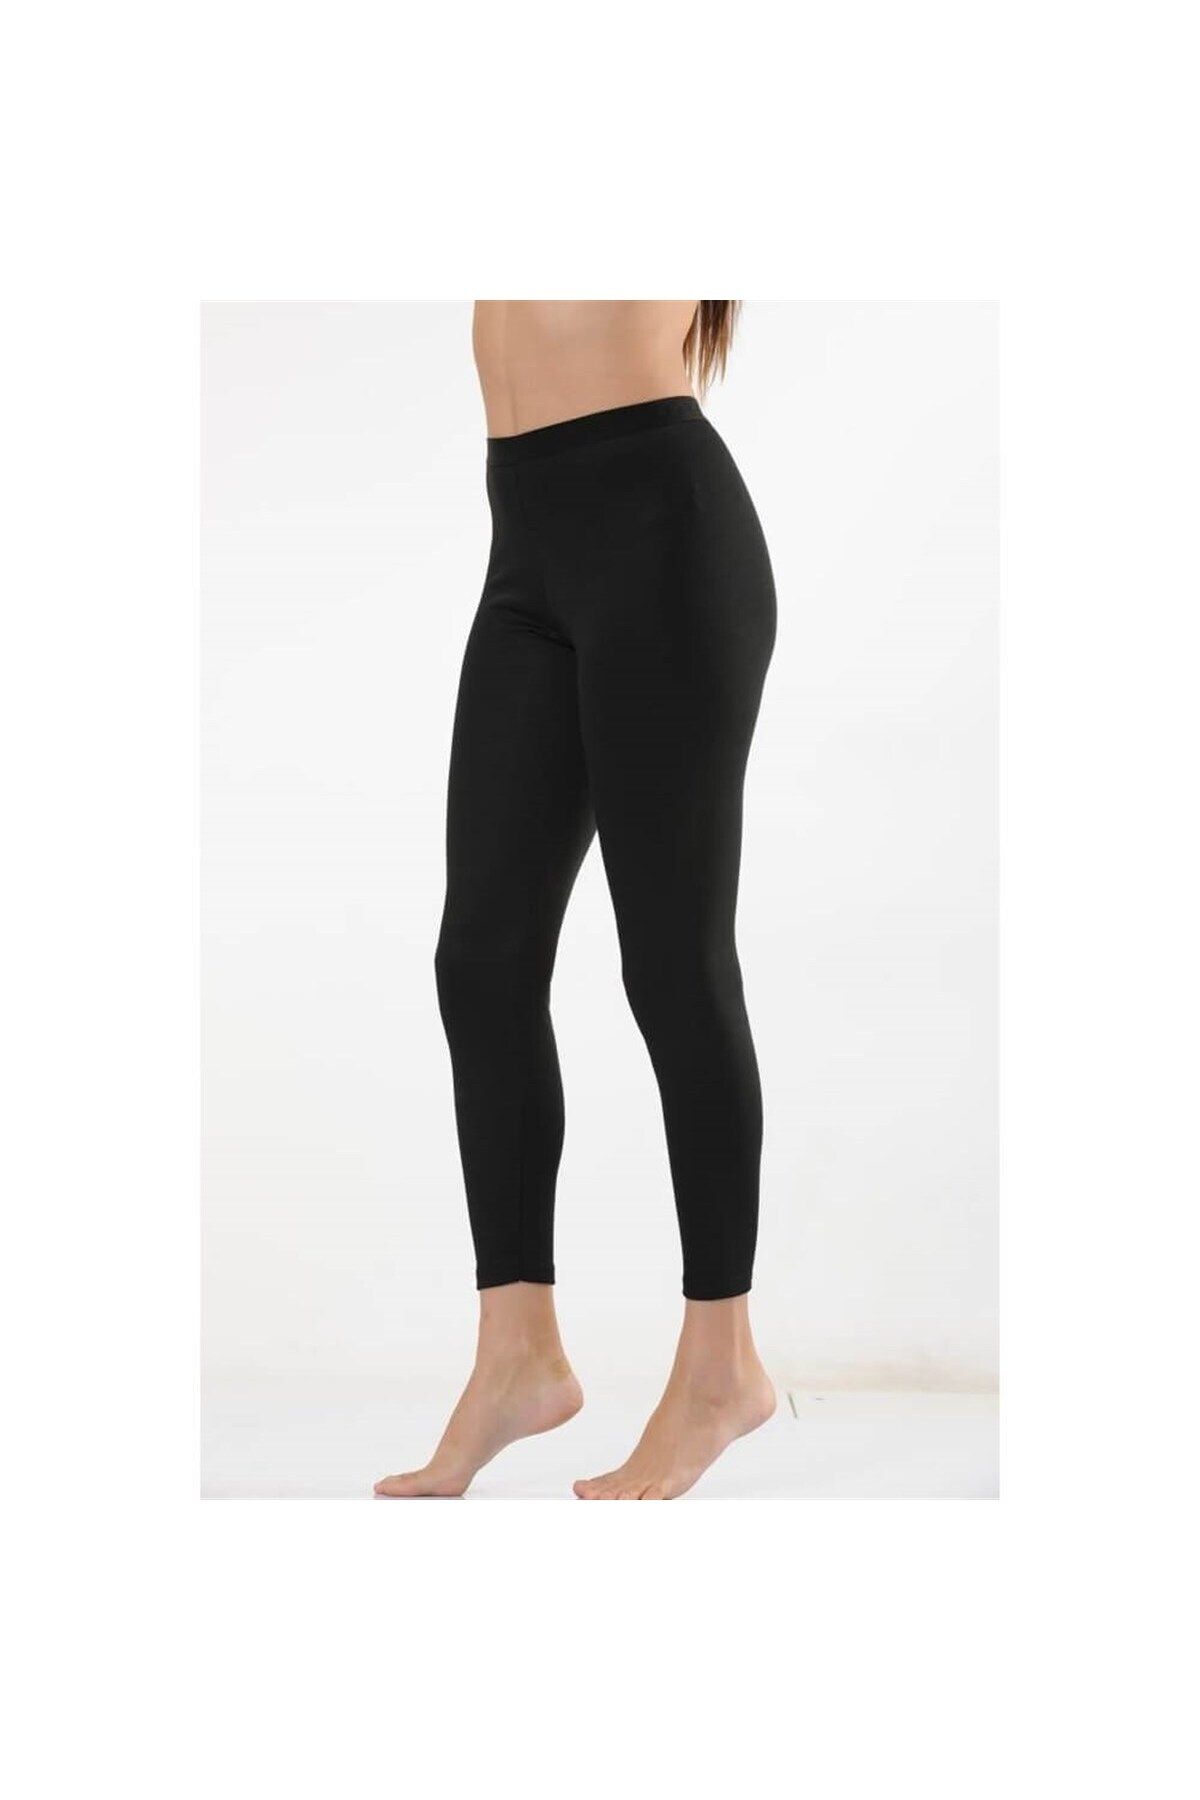 Thermal Outdoor Leggings - Black  Outdoor outfit, Leggings, Thermal  leggings